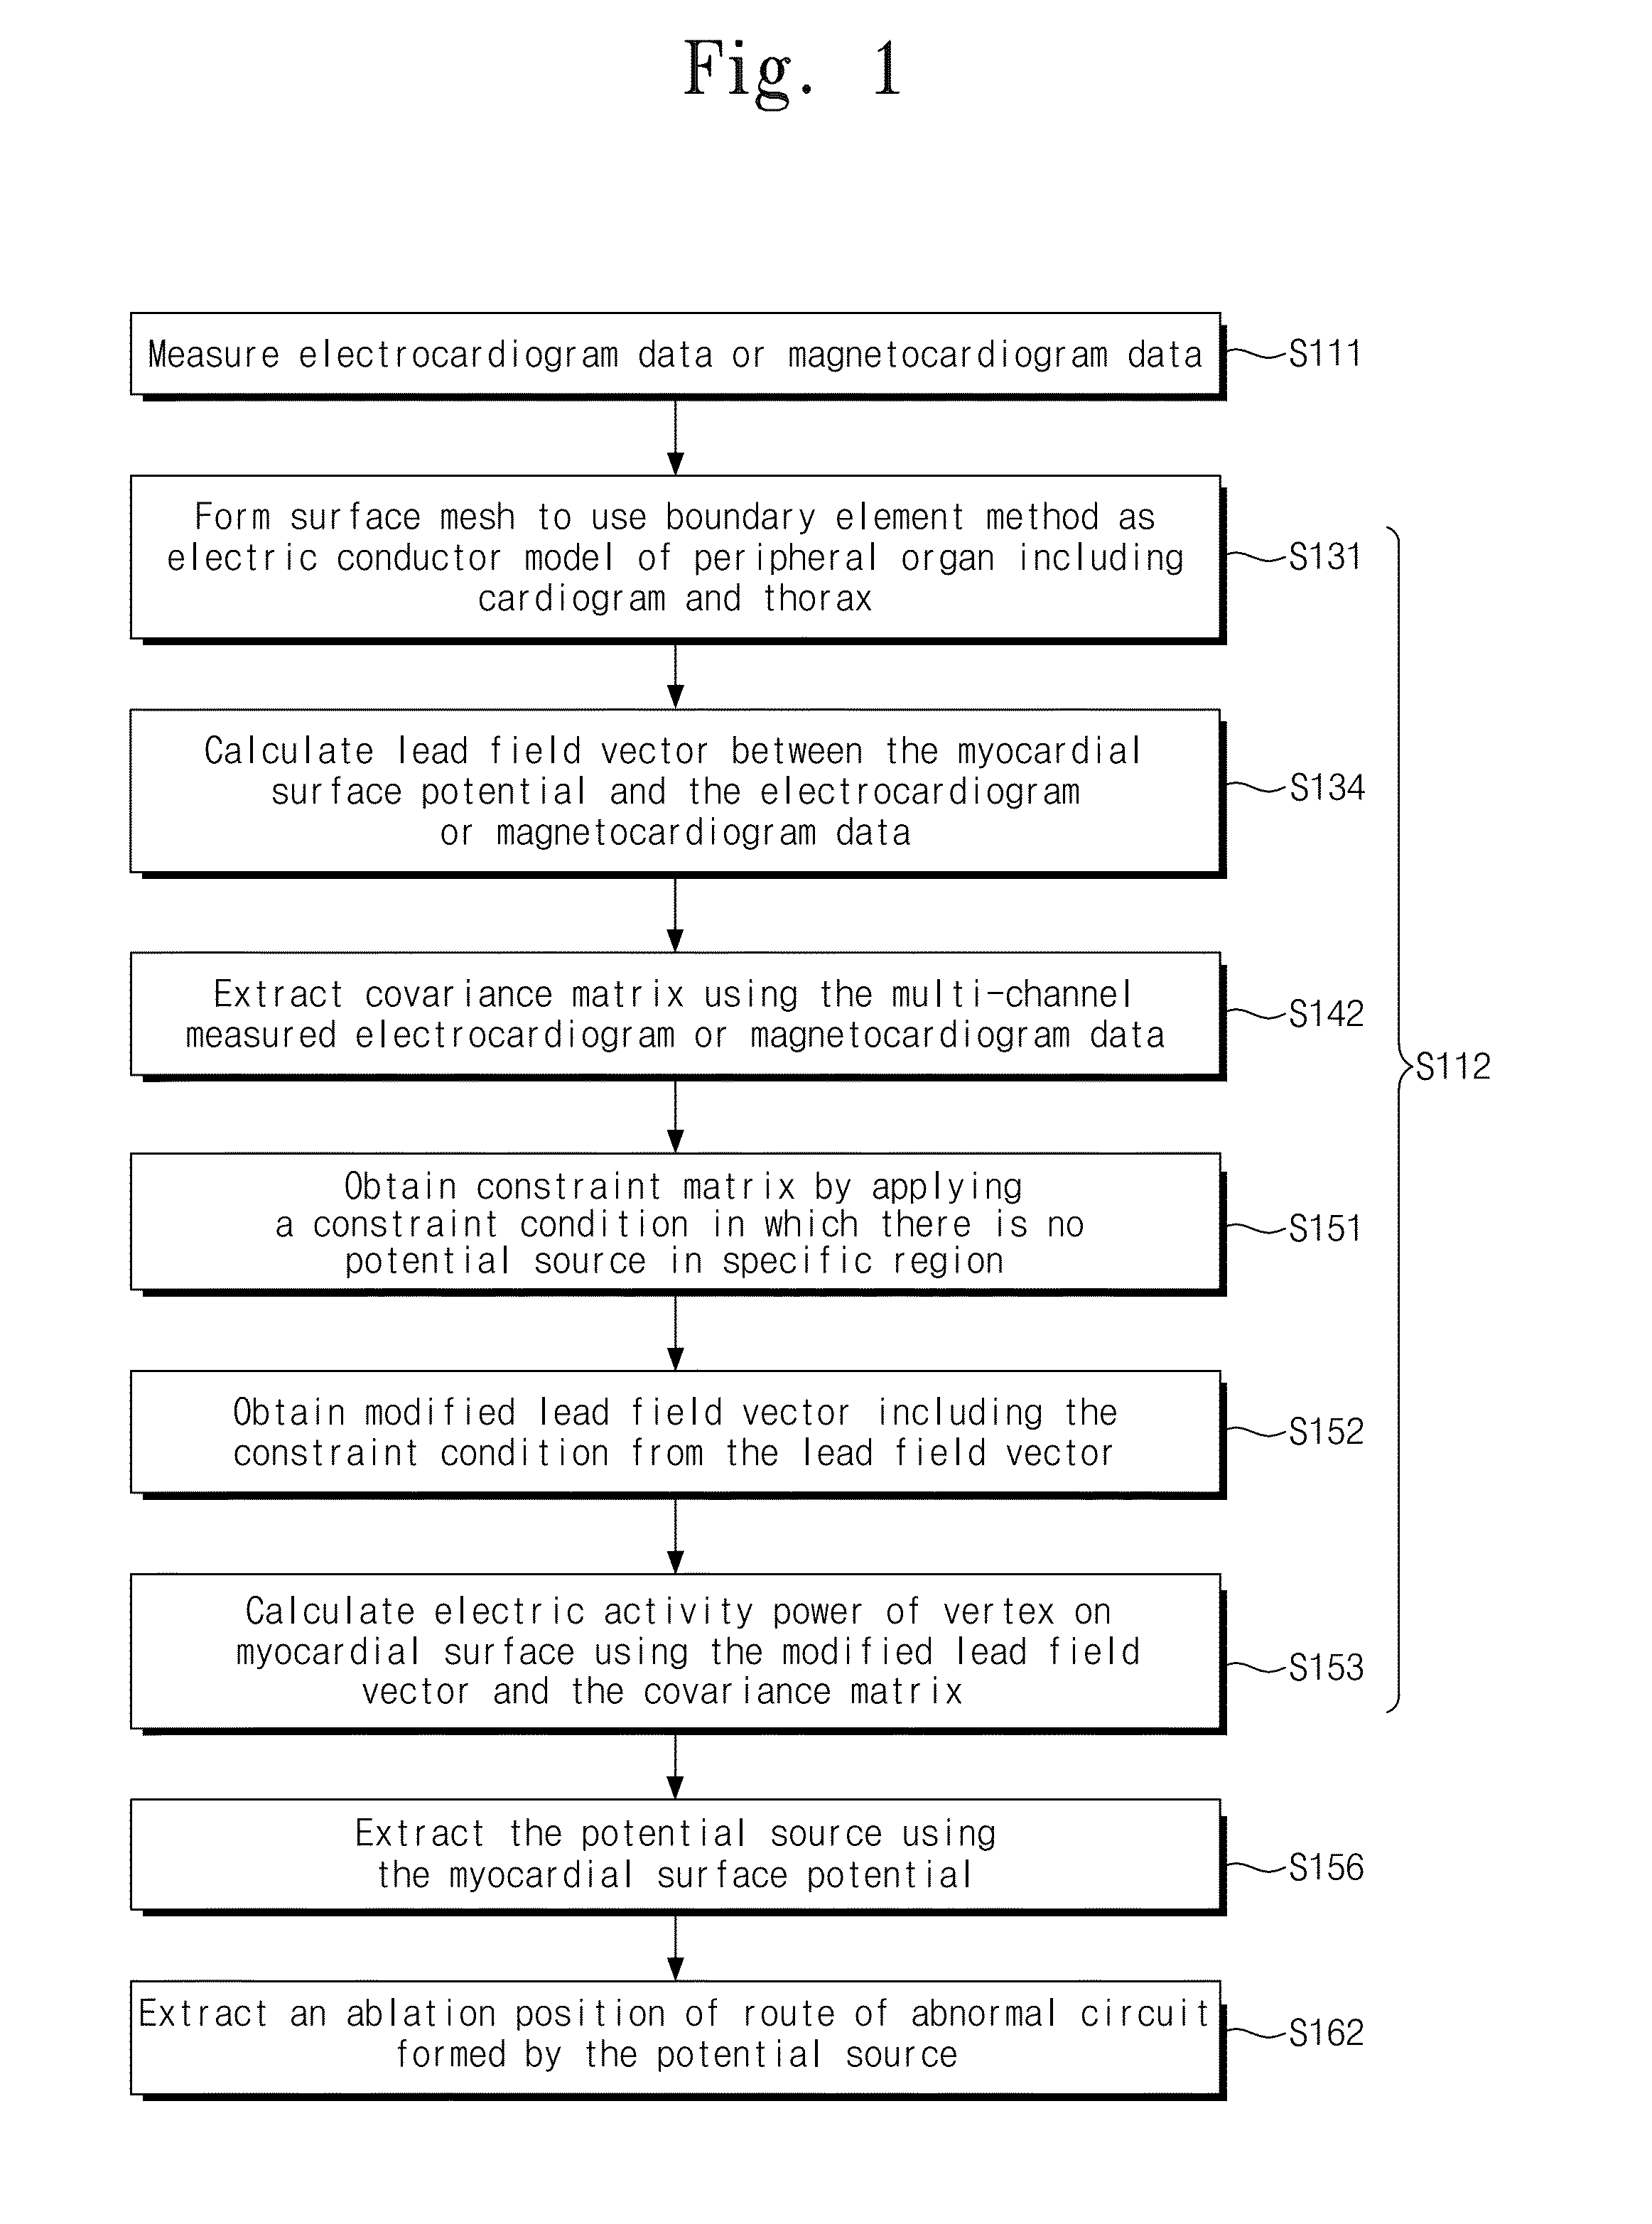 Method for non-invasive mapping of myocardial electric activity